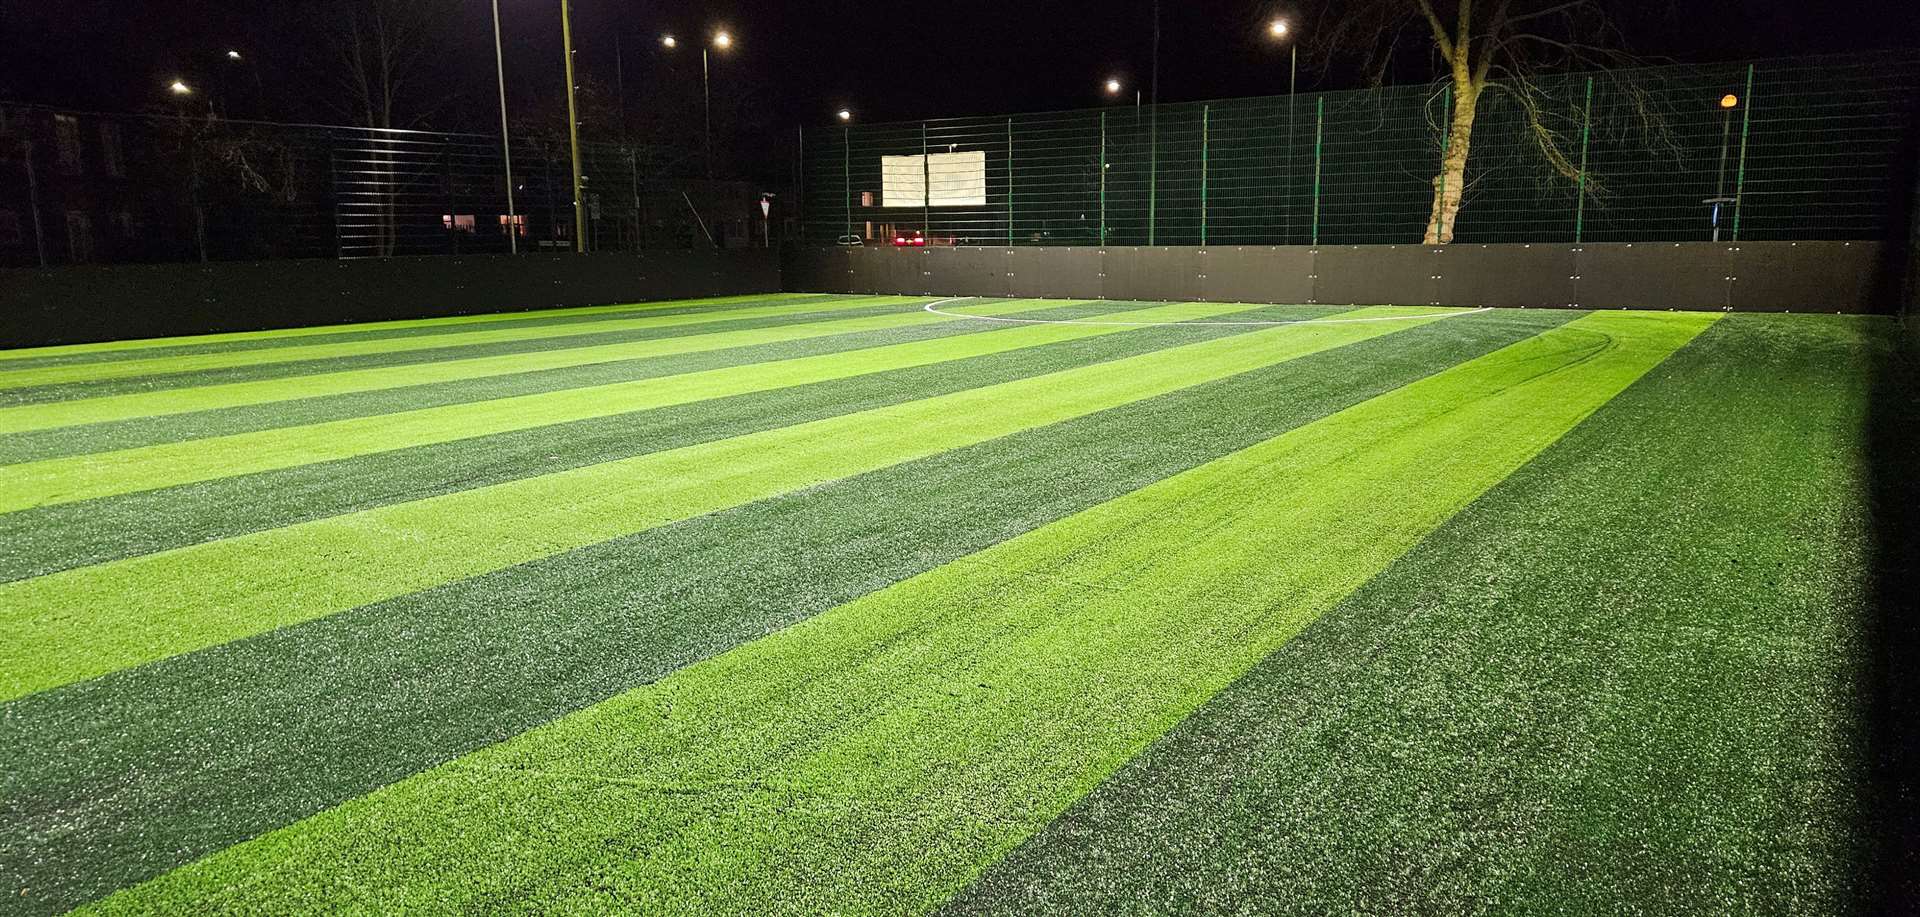 3G football pitch at the newly refurbished Europa Weightlifting Gym in Temple Hill, Dartford. Photo credit: Andrew Callard